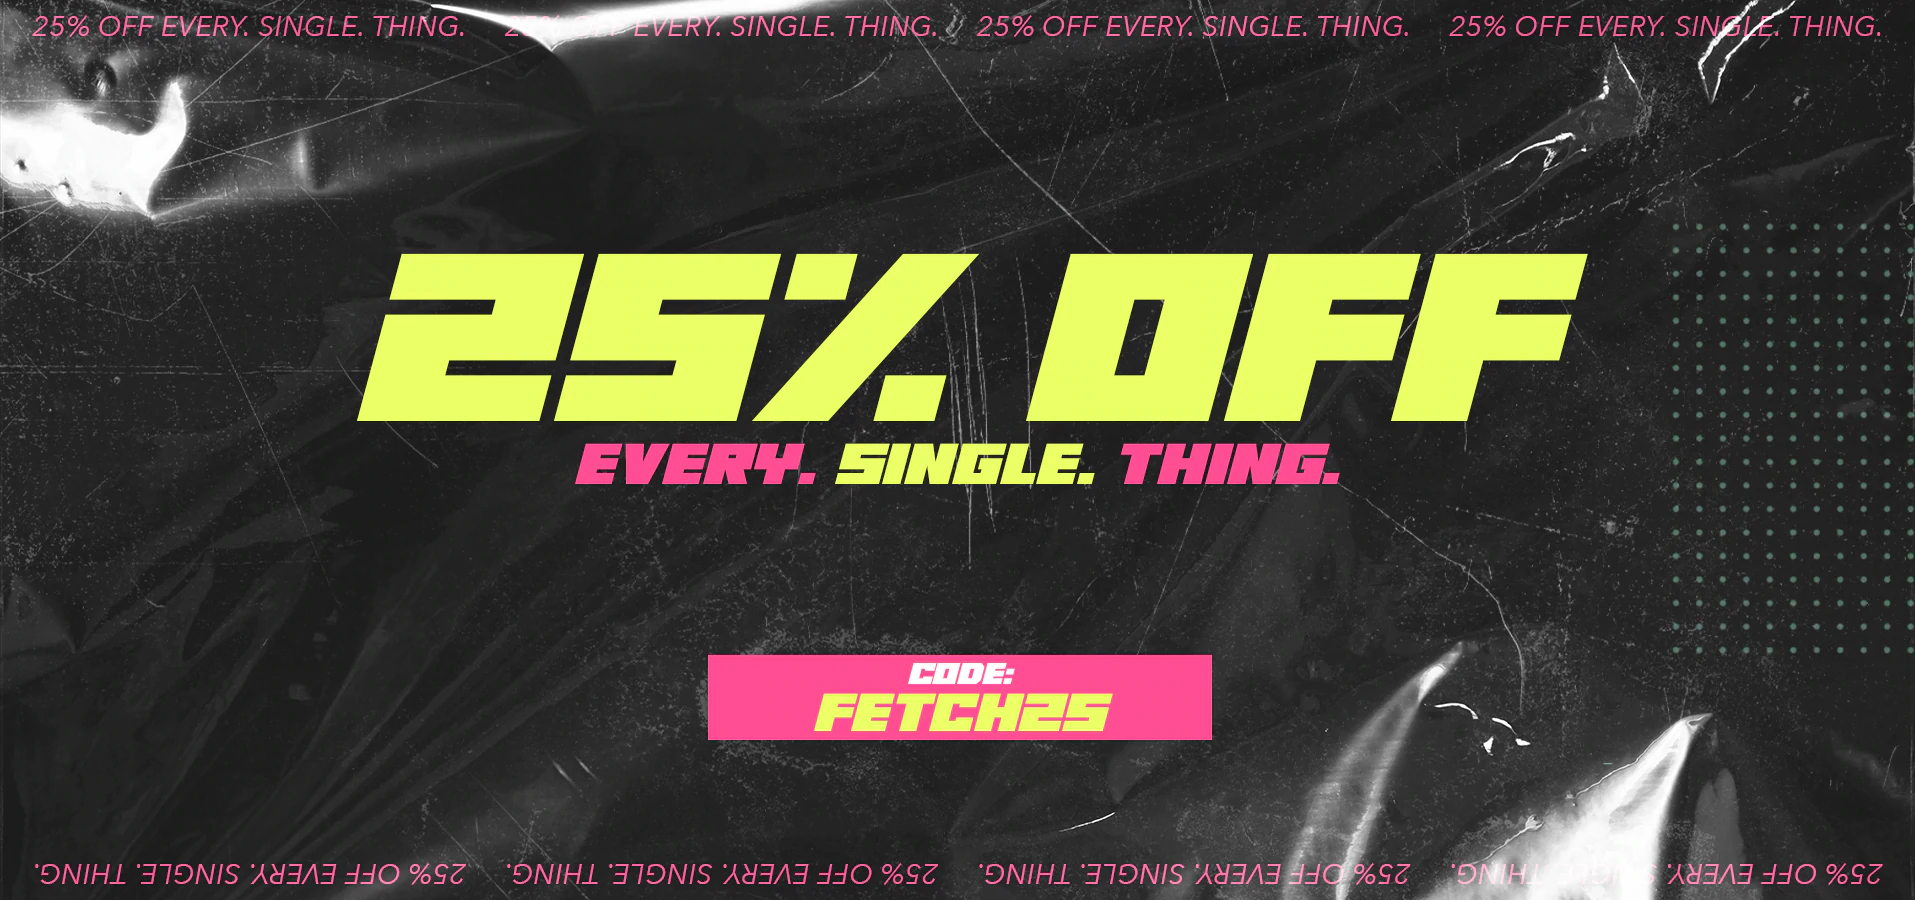 That's So Fetch 25% OFF every single thing from clothing, footwear & accessories with discount code